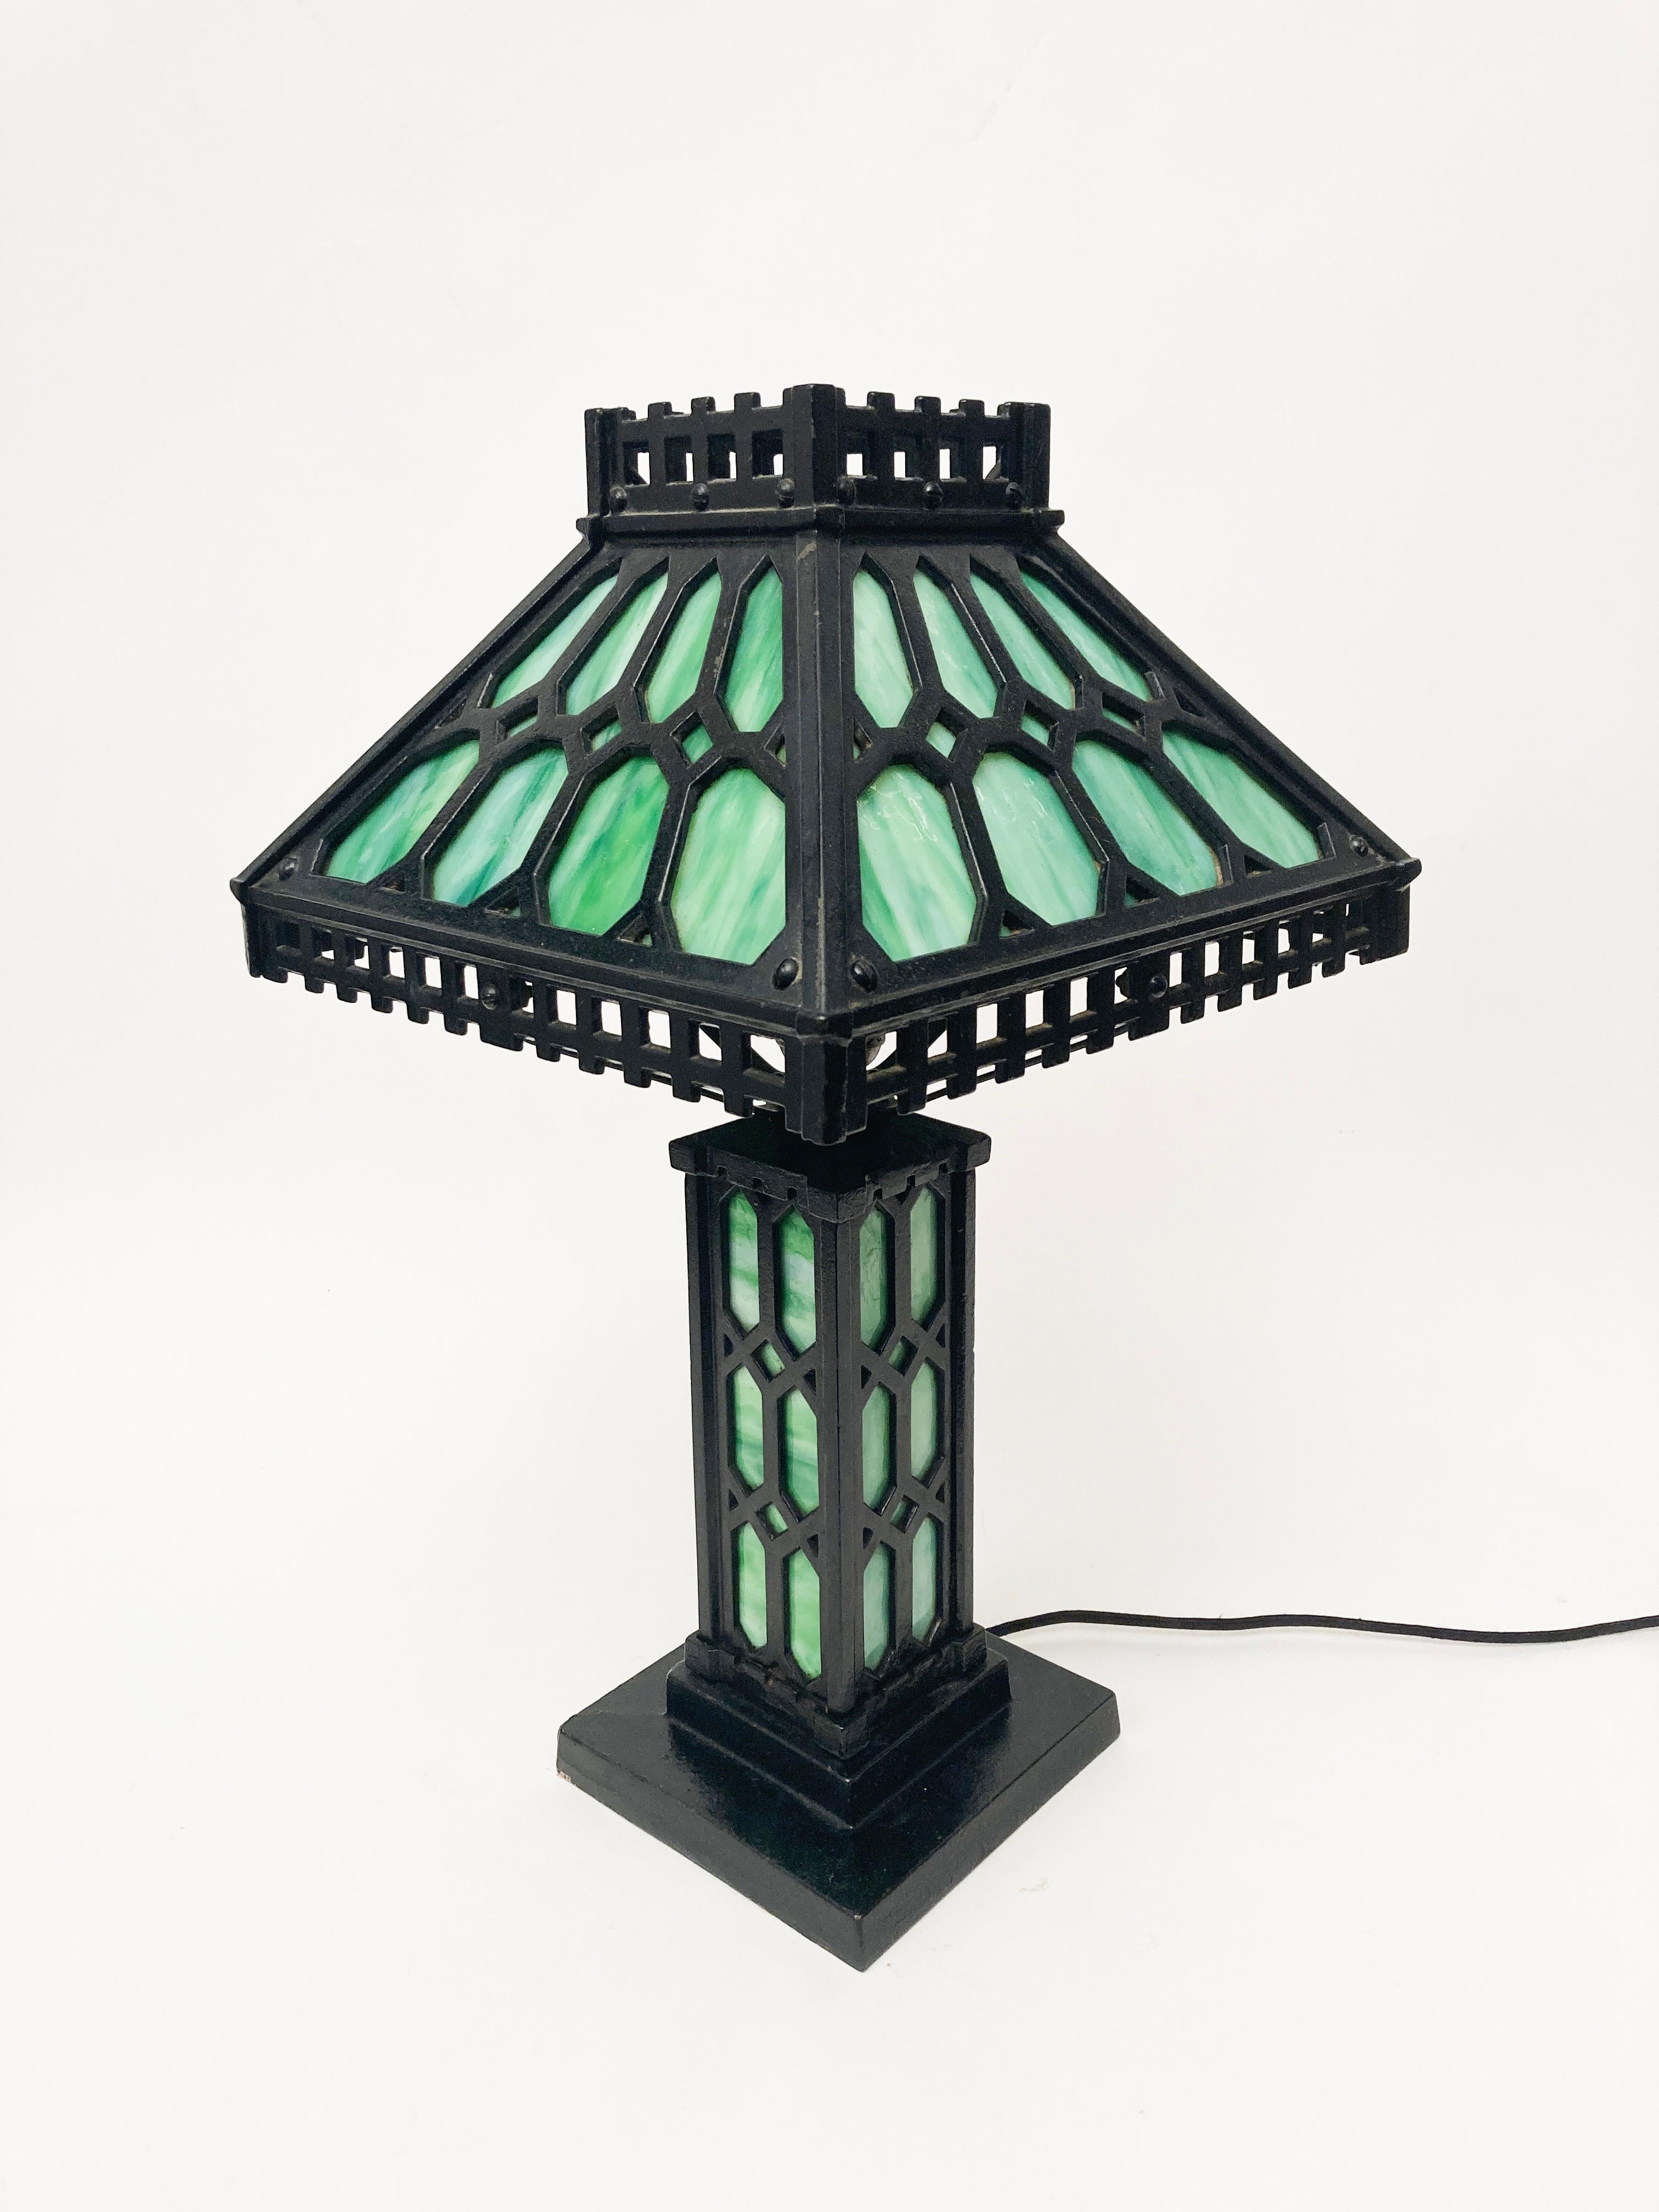 If you're a Mission period enthusiast or looking for that Arts and Crafts piece that finishes the room off with an interesting vibe, this is your lamp. Designed and crafted by Bradley & Hubbard in the early 1900's, this Mission style lamp is made of